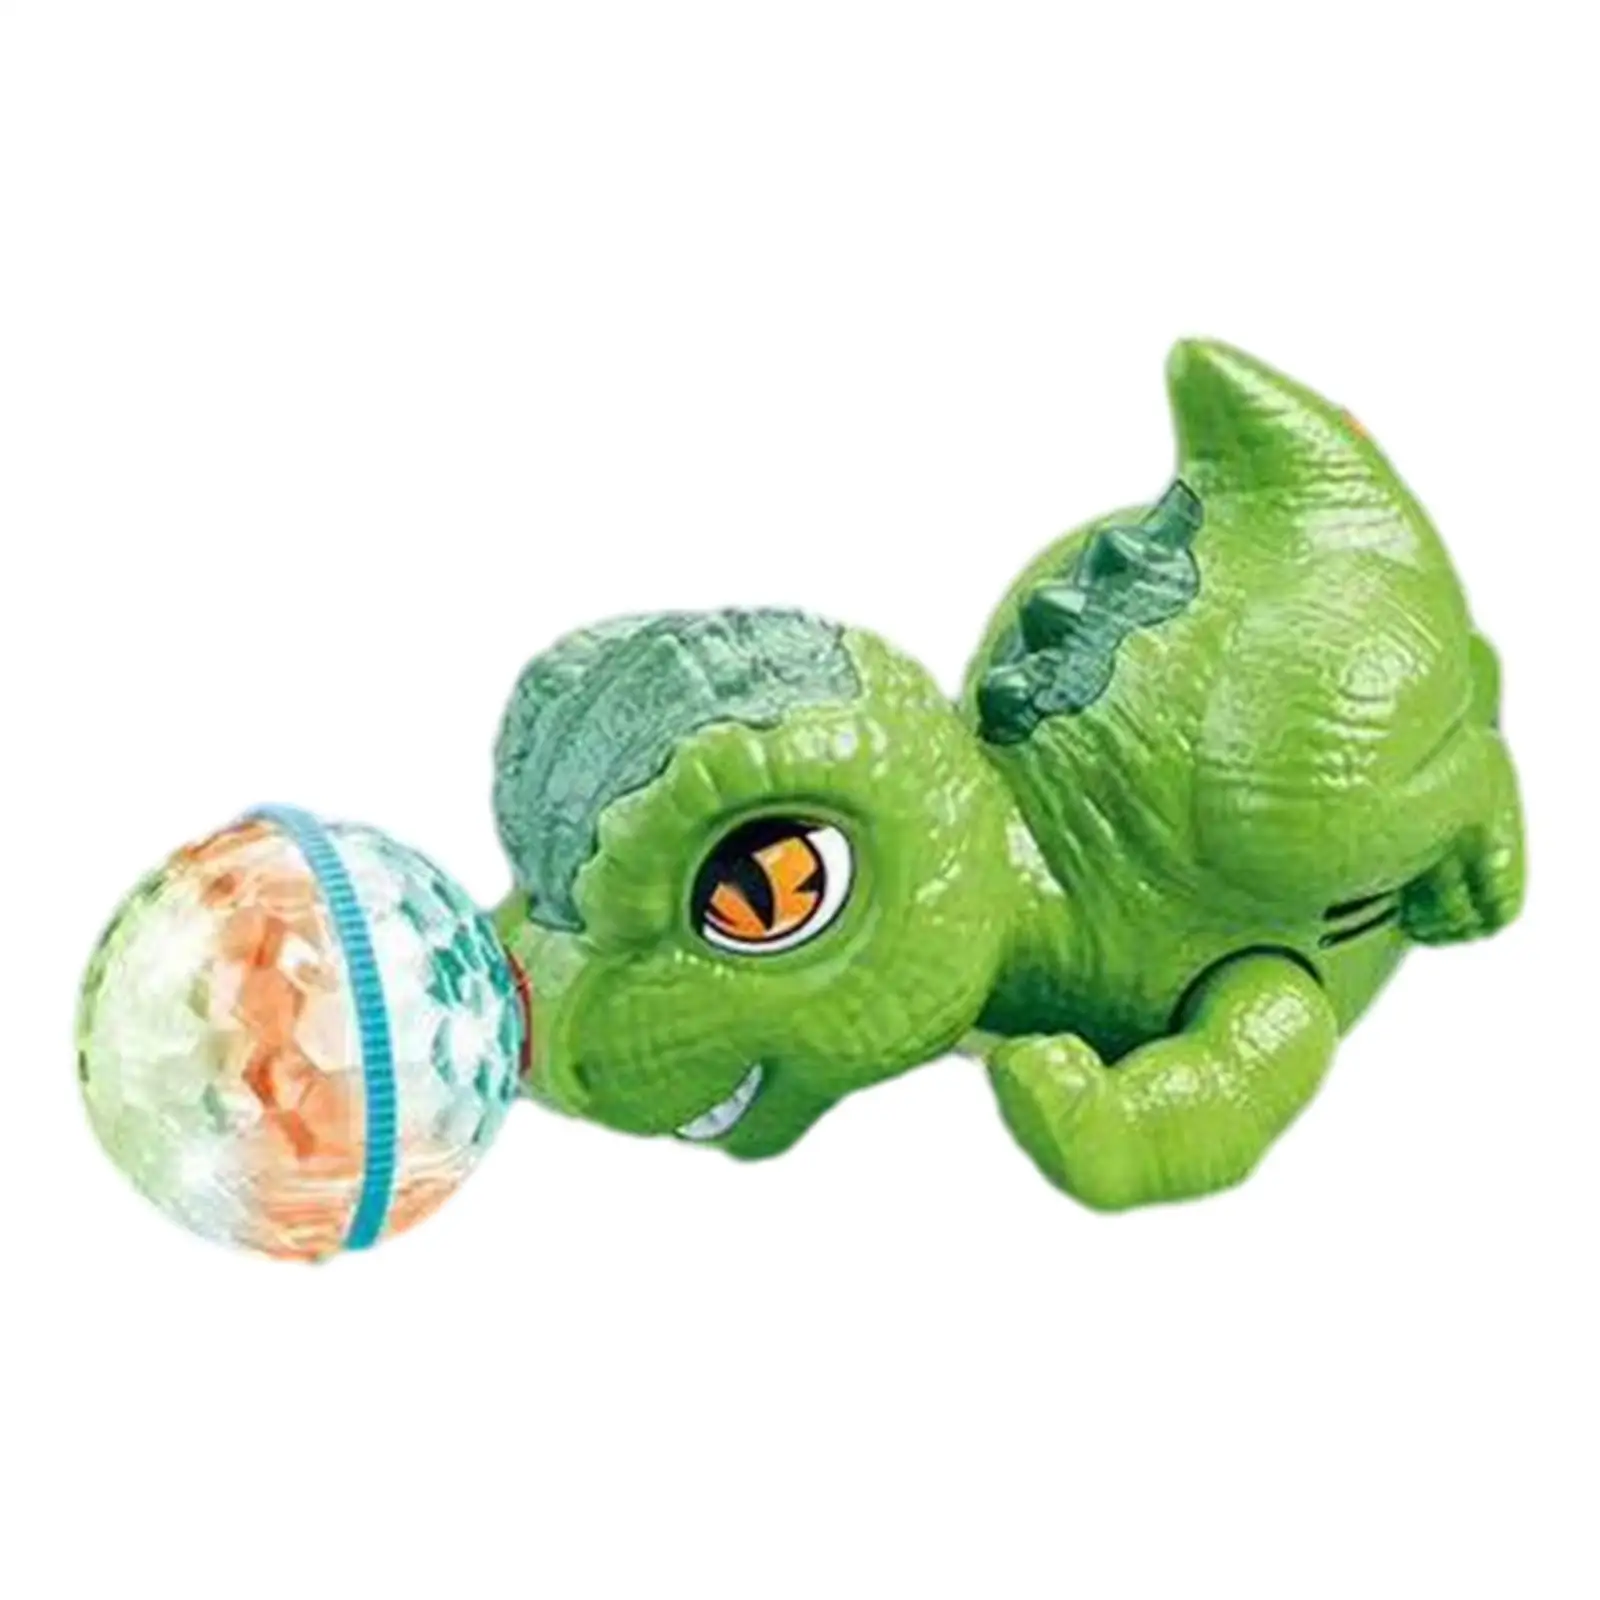 Walking Dinosaur Toys Dinosaur Toys with Light Music for Party Favor Chasing